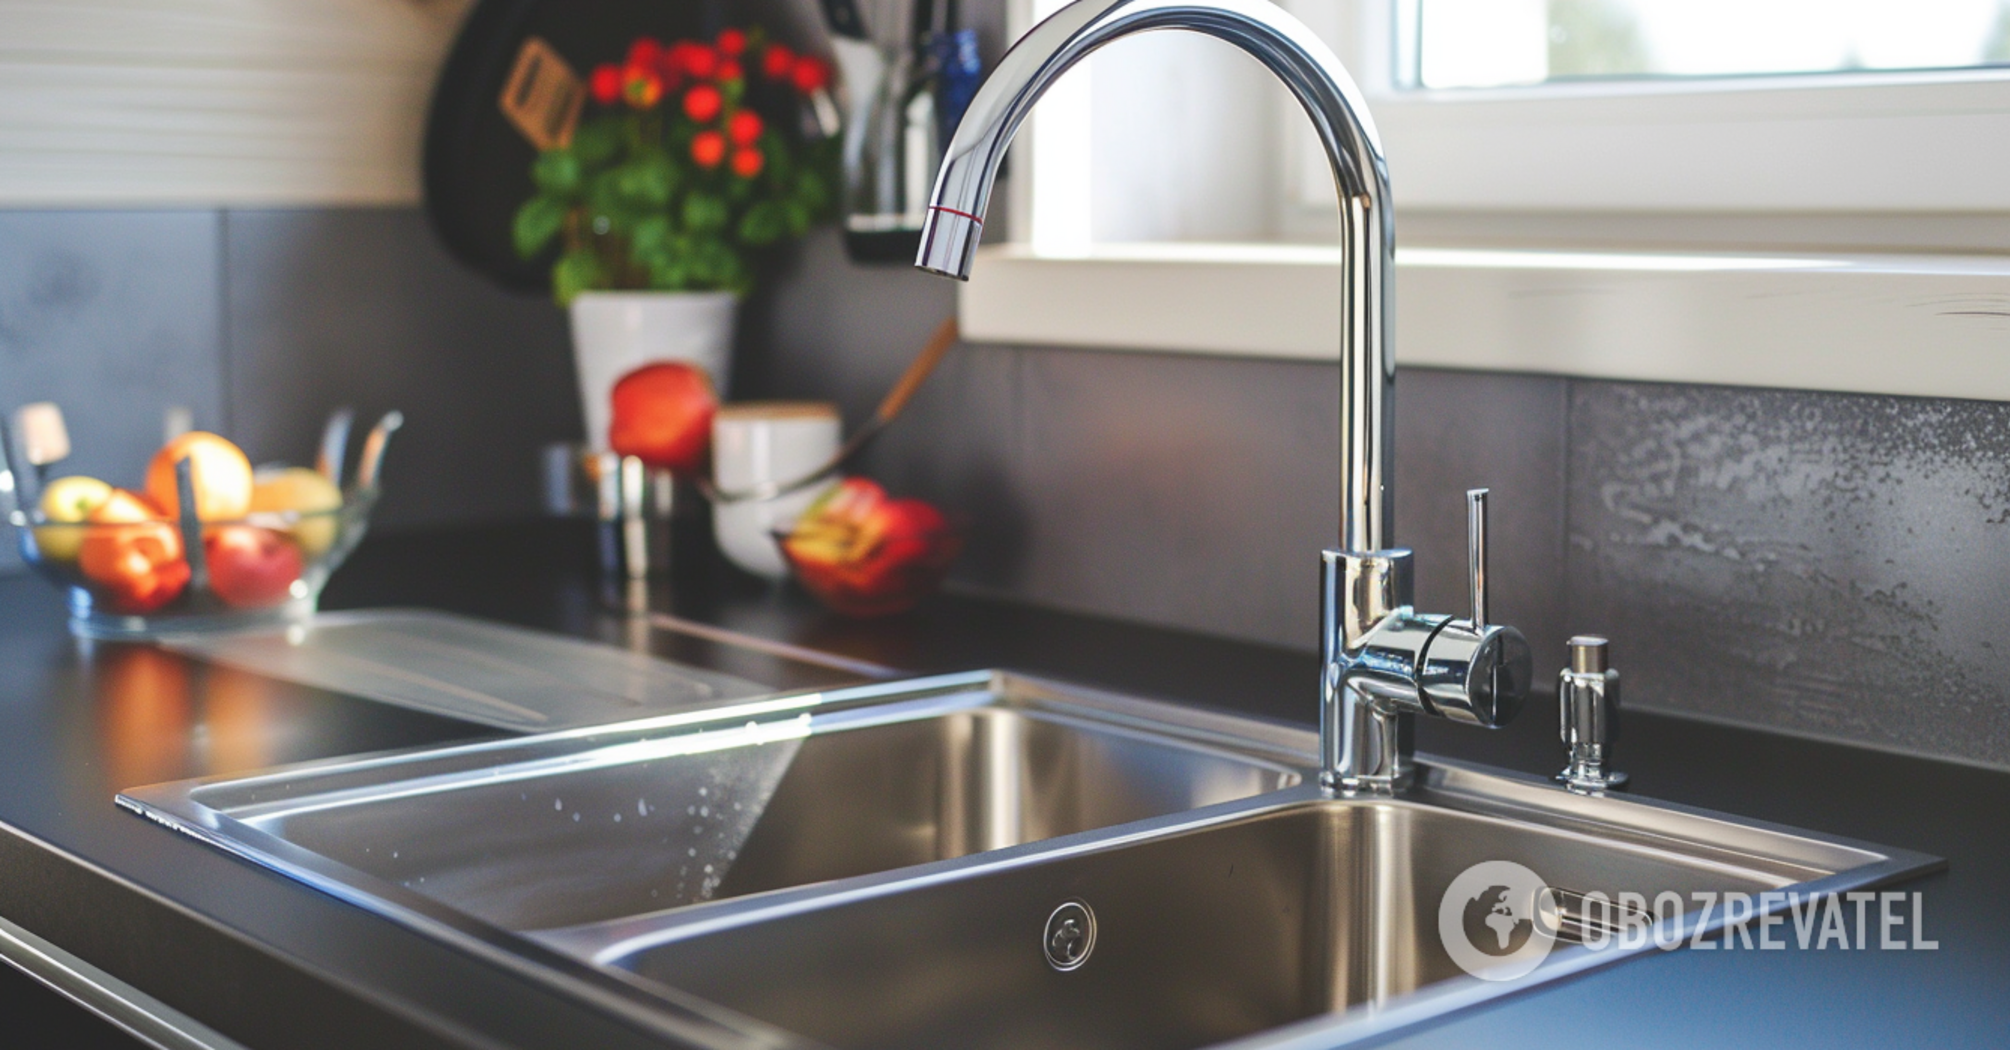 How to clean a stainless steel sink without chemicals: the best ways